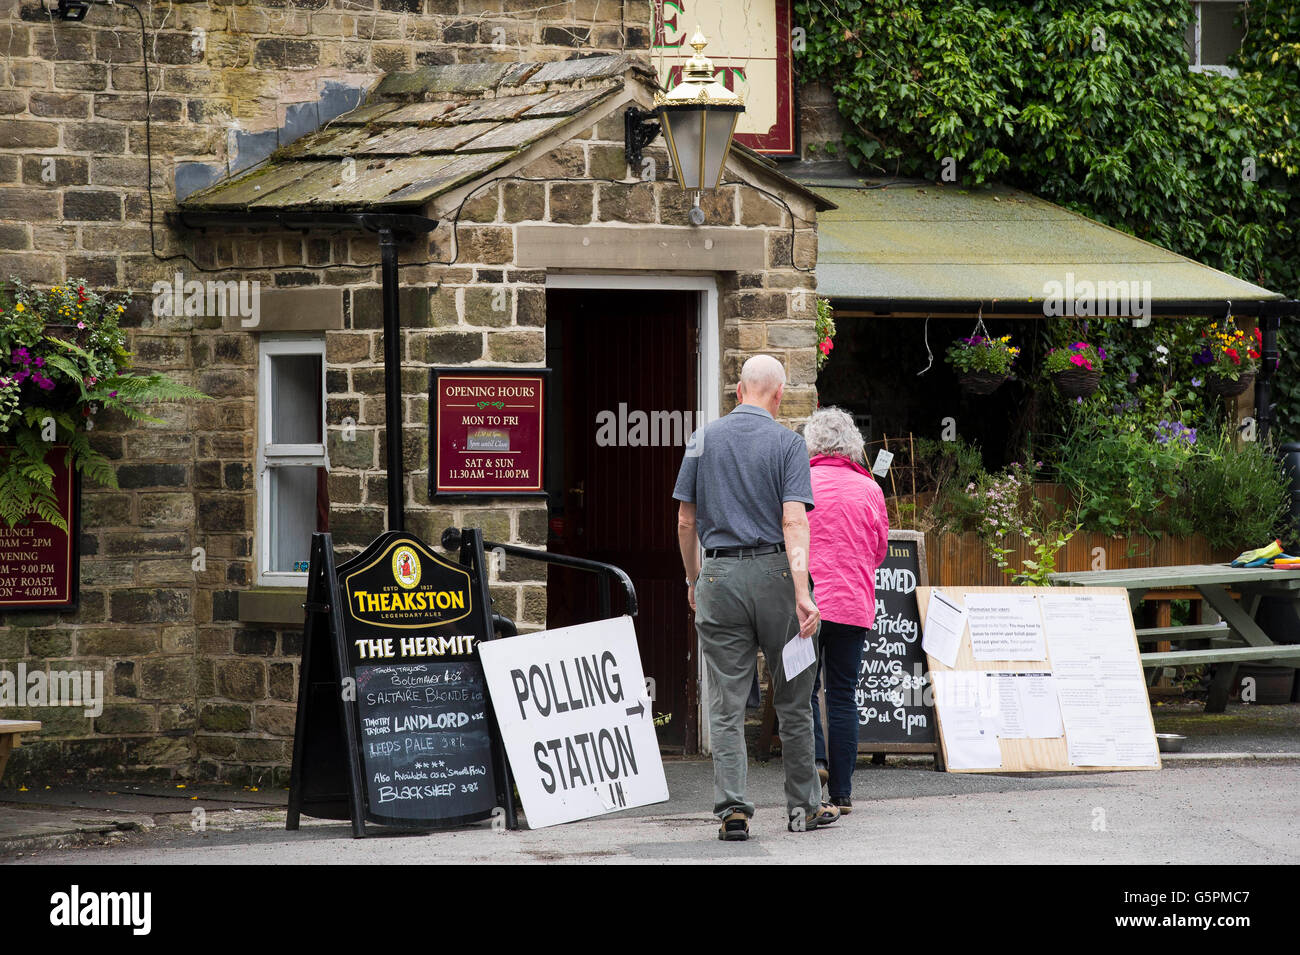 The Hermit, a village pub in Burley Woodhead, West Yorkshire, Britain. 23rd June, 2016. About to cast their vote, a couple arrive at this EU Referendum Polling Station. Credit:  Ian Lamond/Alamy Live News Stock Photo